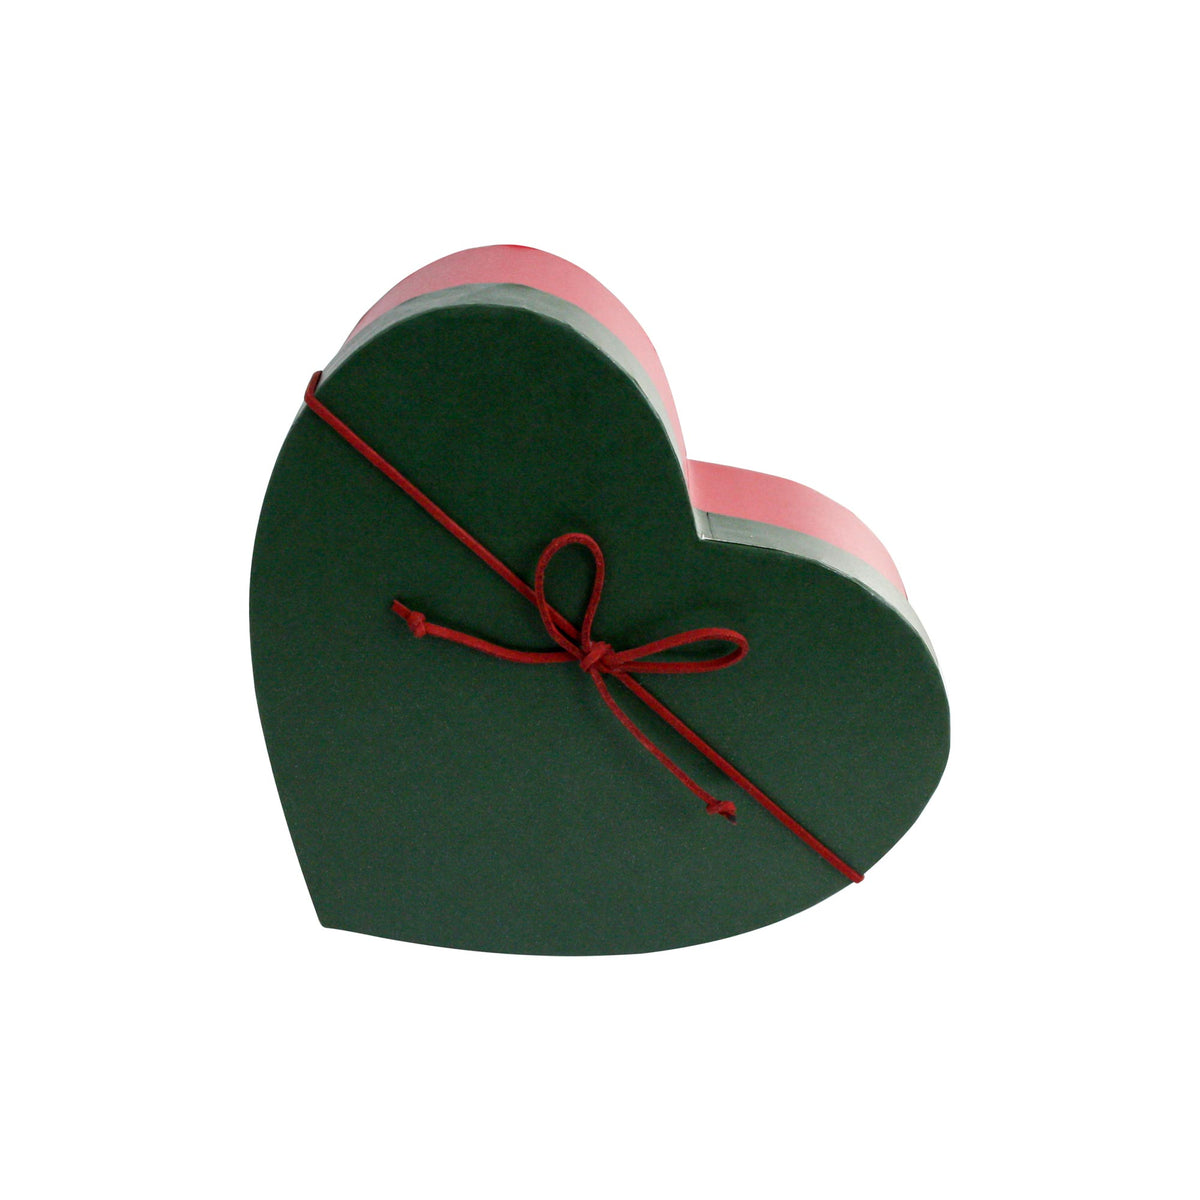 Single Red/Green Gift Box with Red Bow Ribbon (Sizes Available)